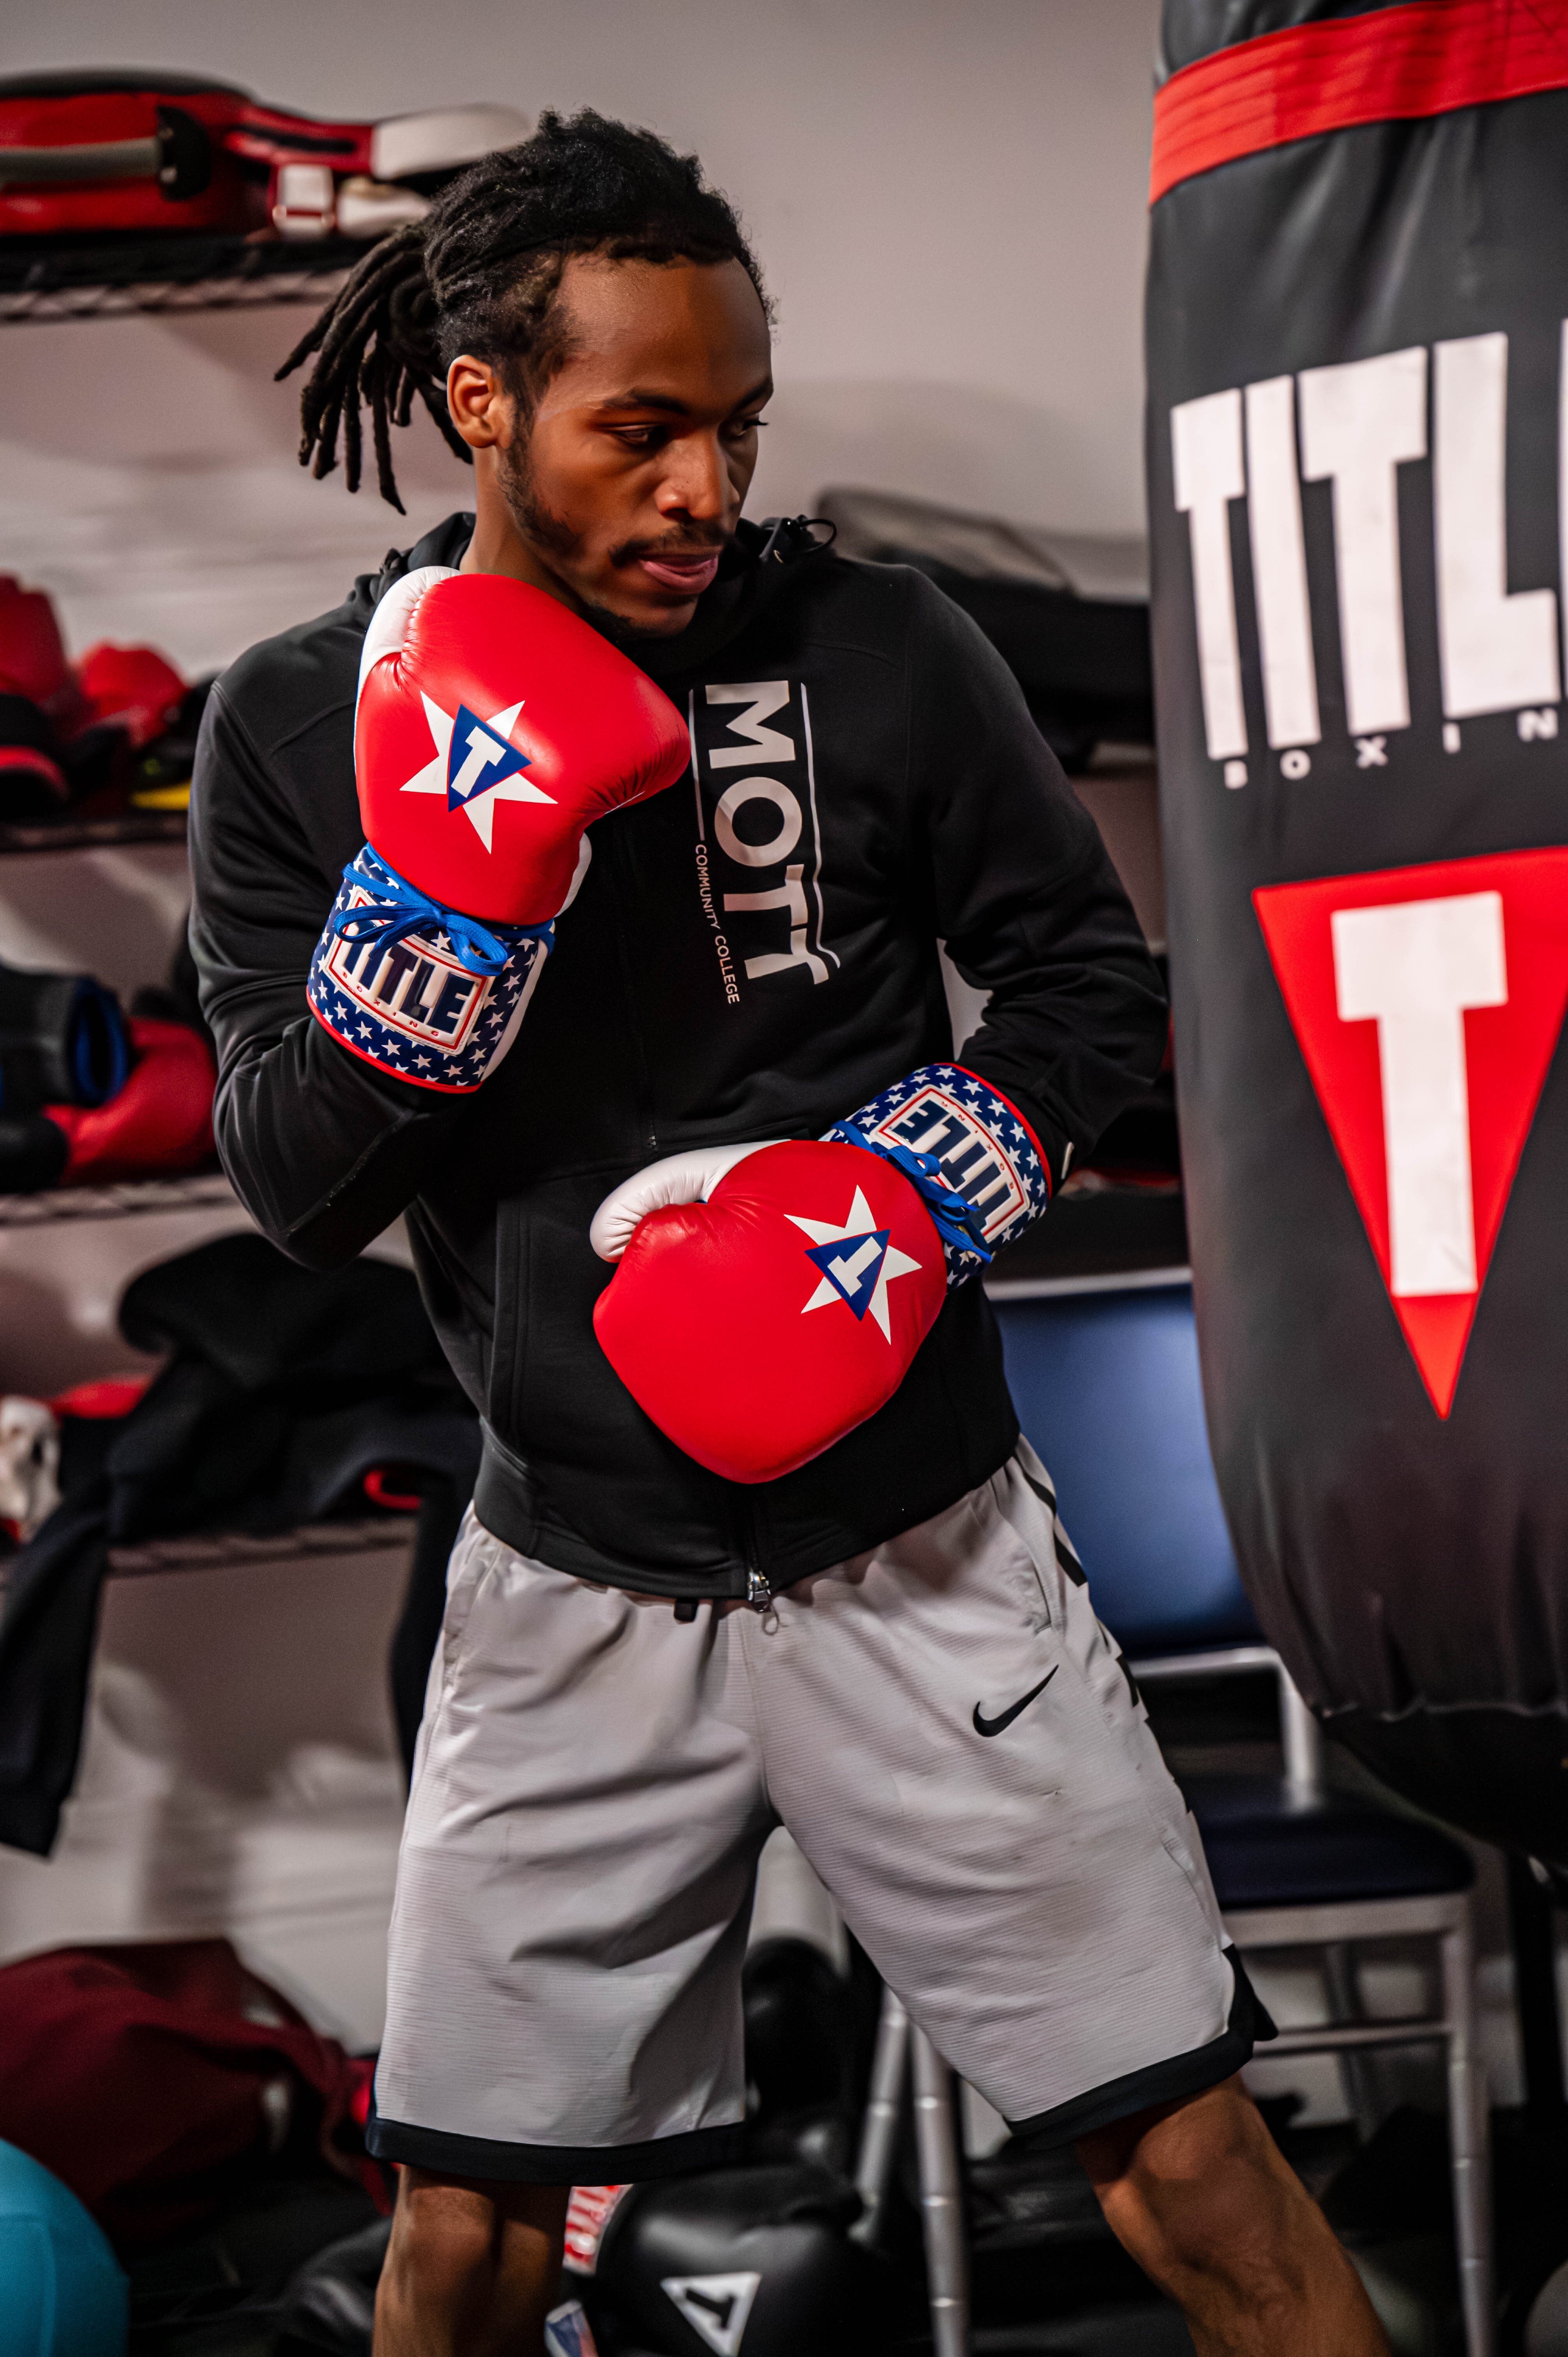 Jaylyn Nichols spars for conditioning with a punching heavy bag in 3-minute simulated rounds to prepare for the fight.